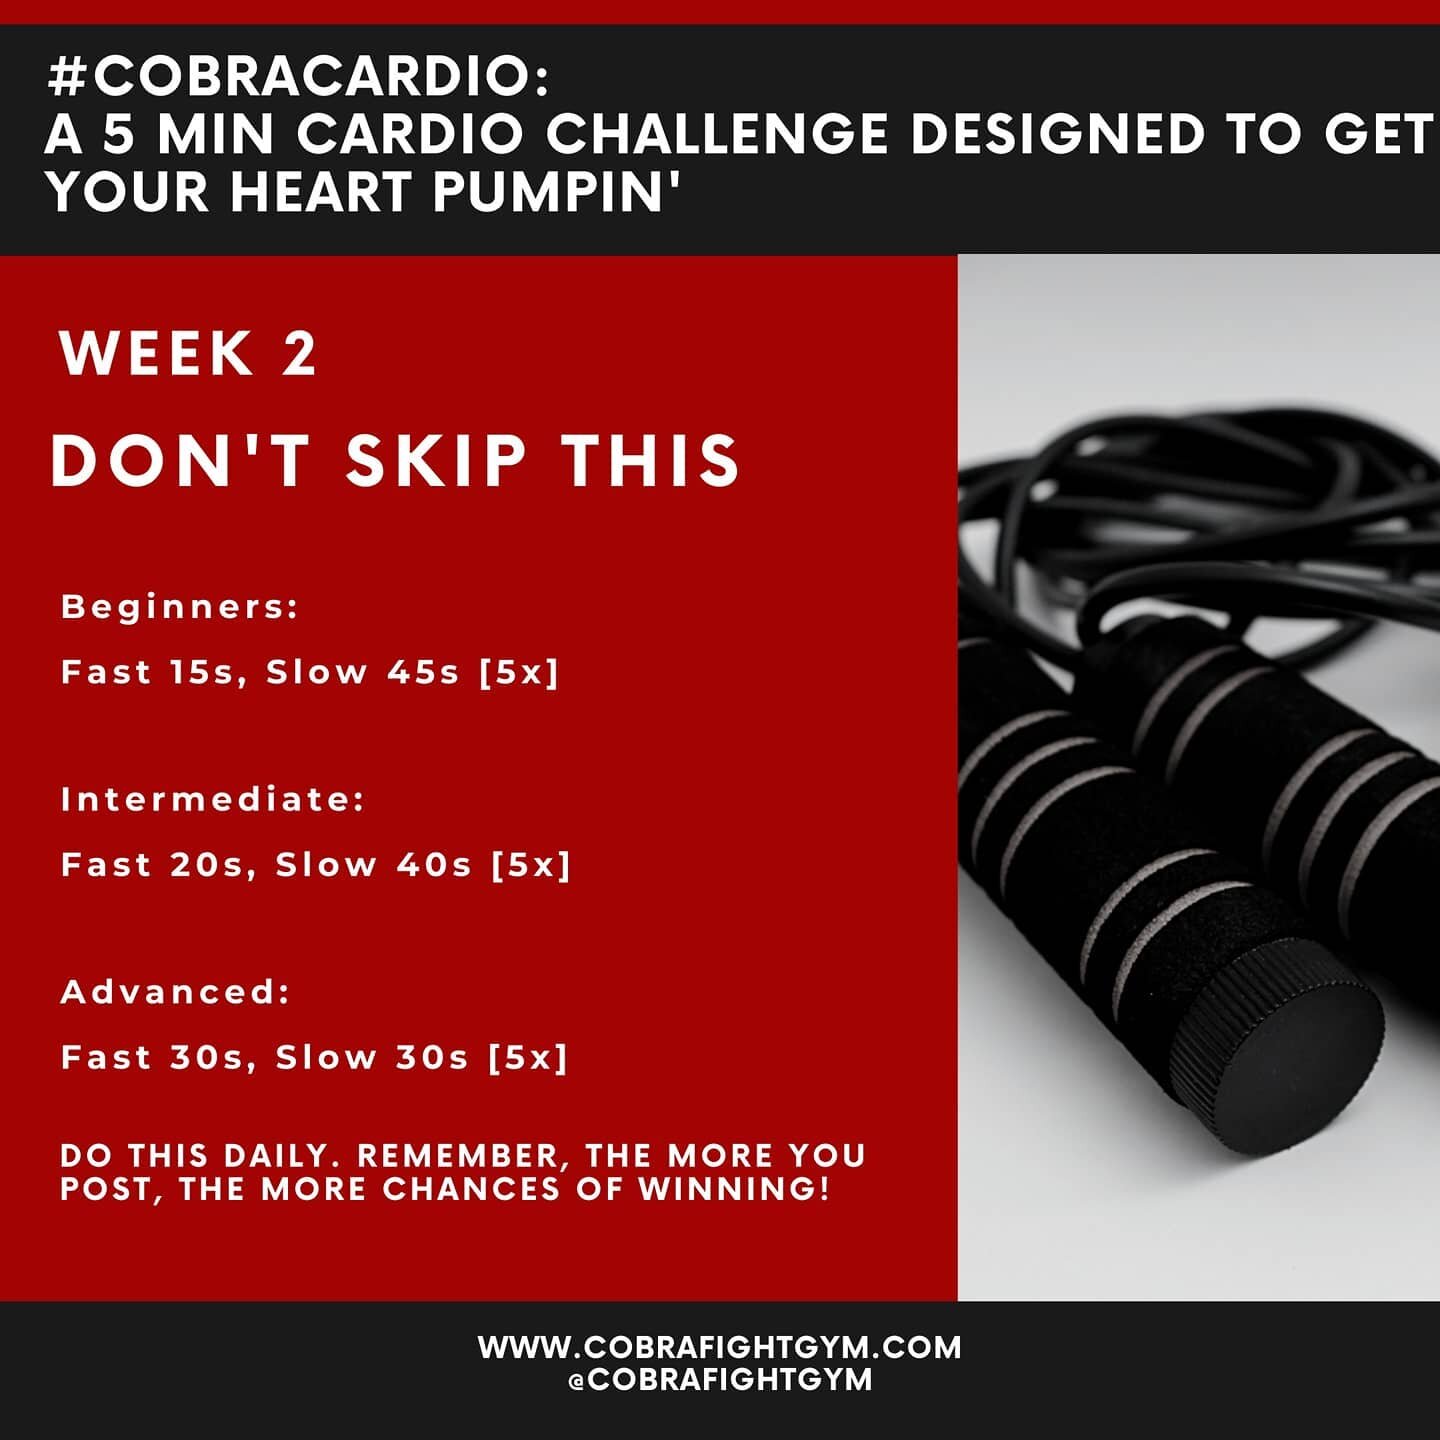 #CobraCardio Week 2 is here! Join our skipping challenge and win a free private class with Coach Jai!

Post your workout selfie / video and tag @cobrafightgym to win! Winner chosen on Tues 1 Sep.

 Swipe for contest rules ➡️
.
.
.
#cobrafightgym #sin